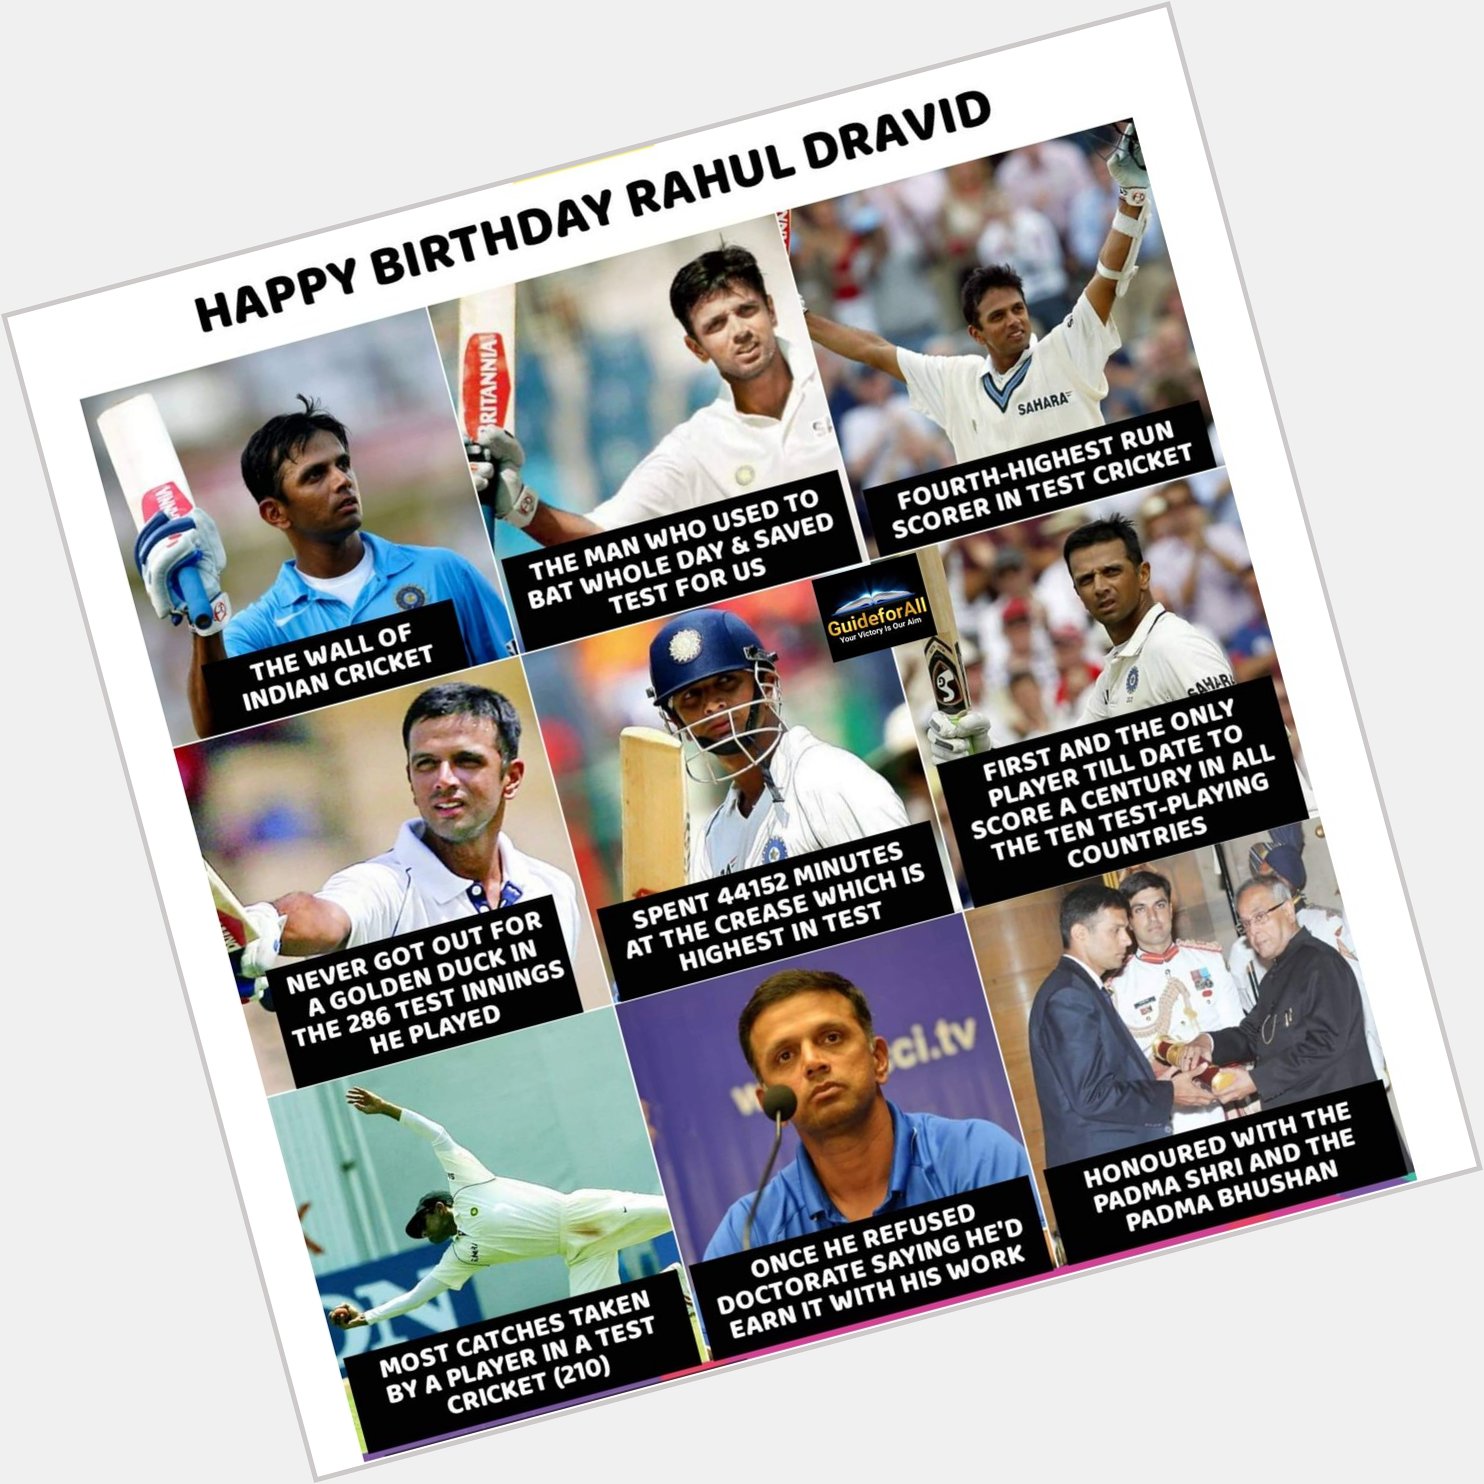 Happy Birthday Rahul Dravid Sir   Most balls faced in Test history
31,258 